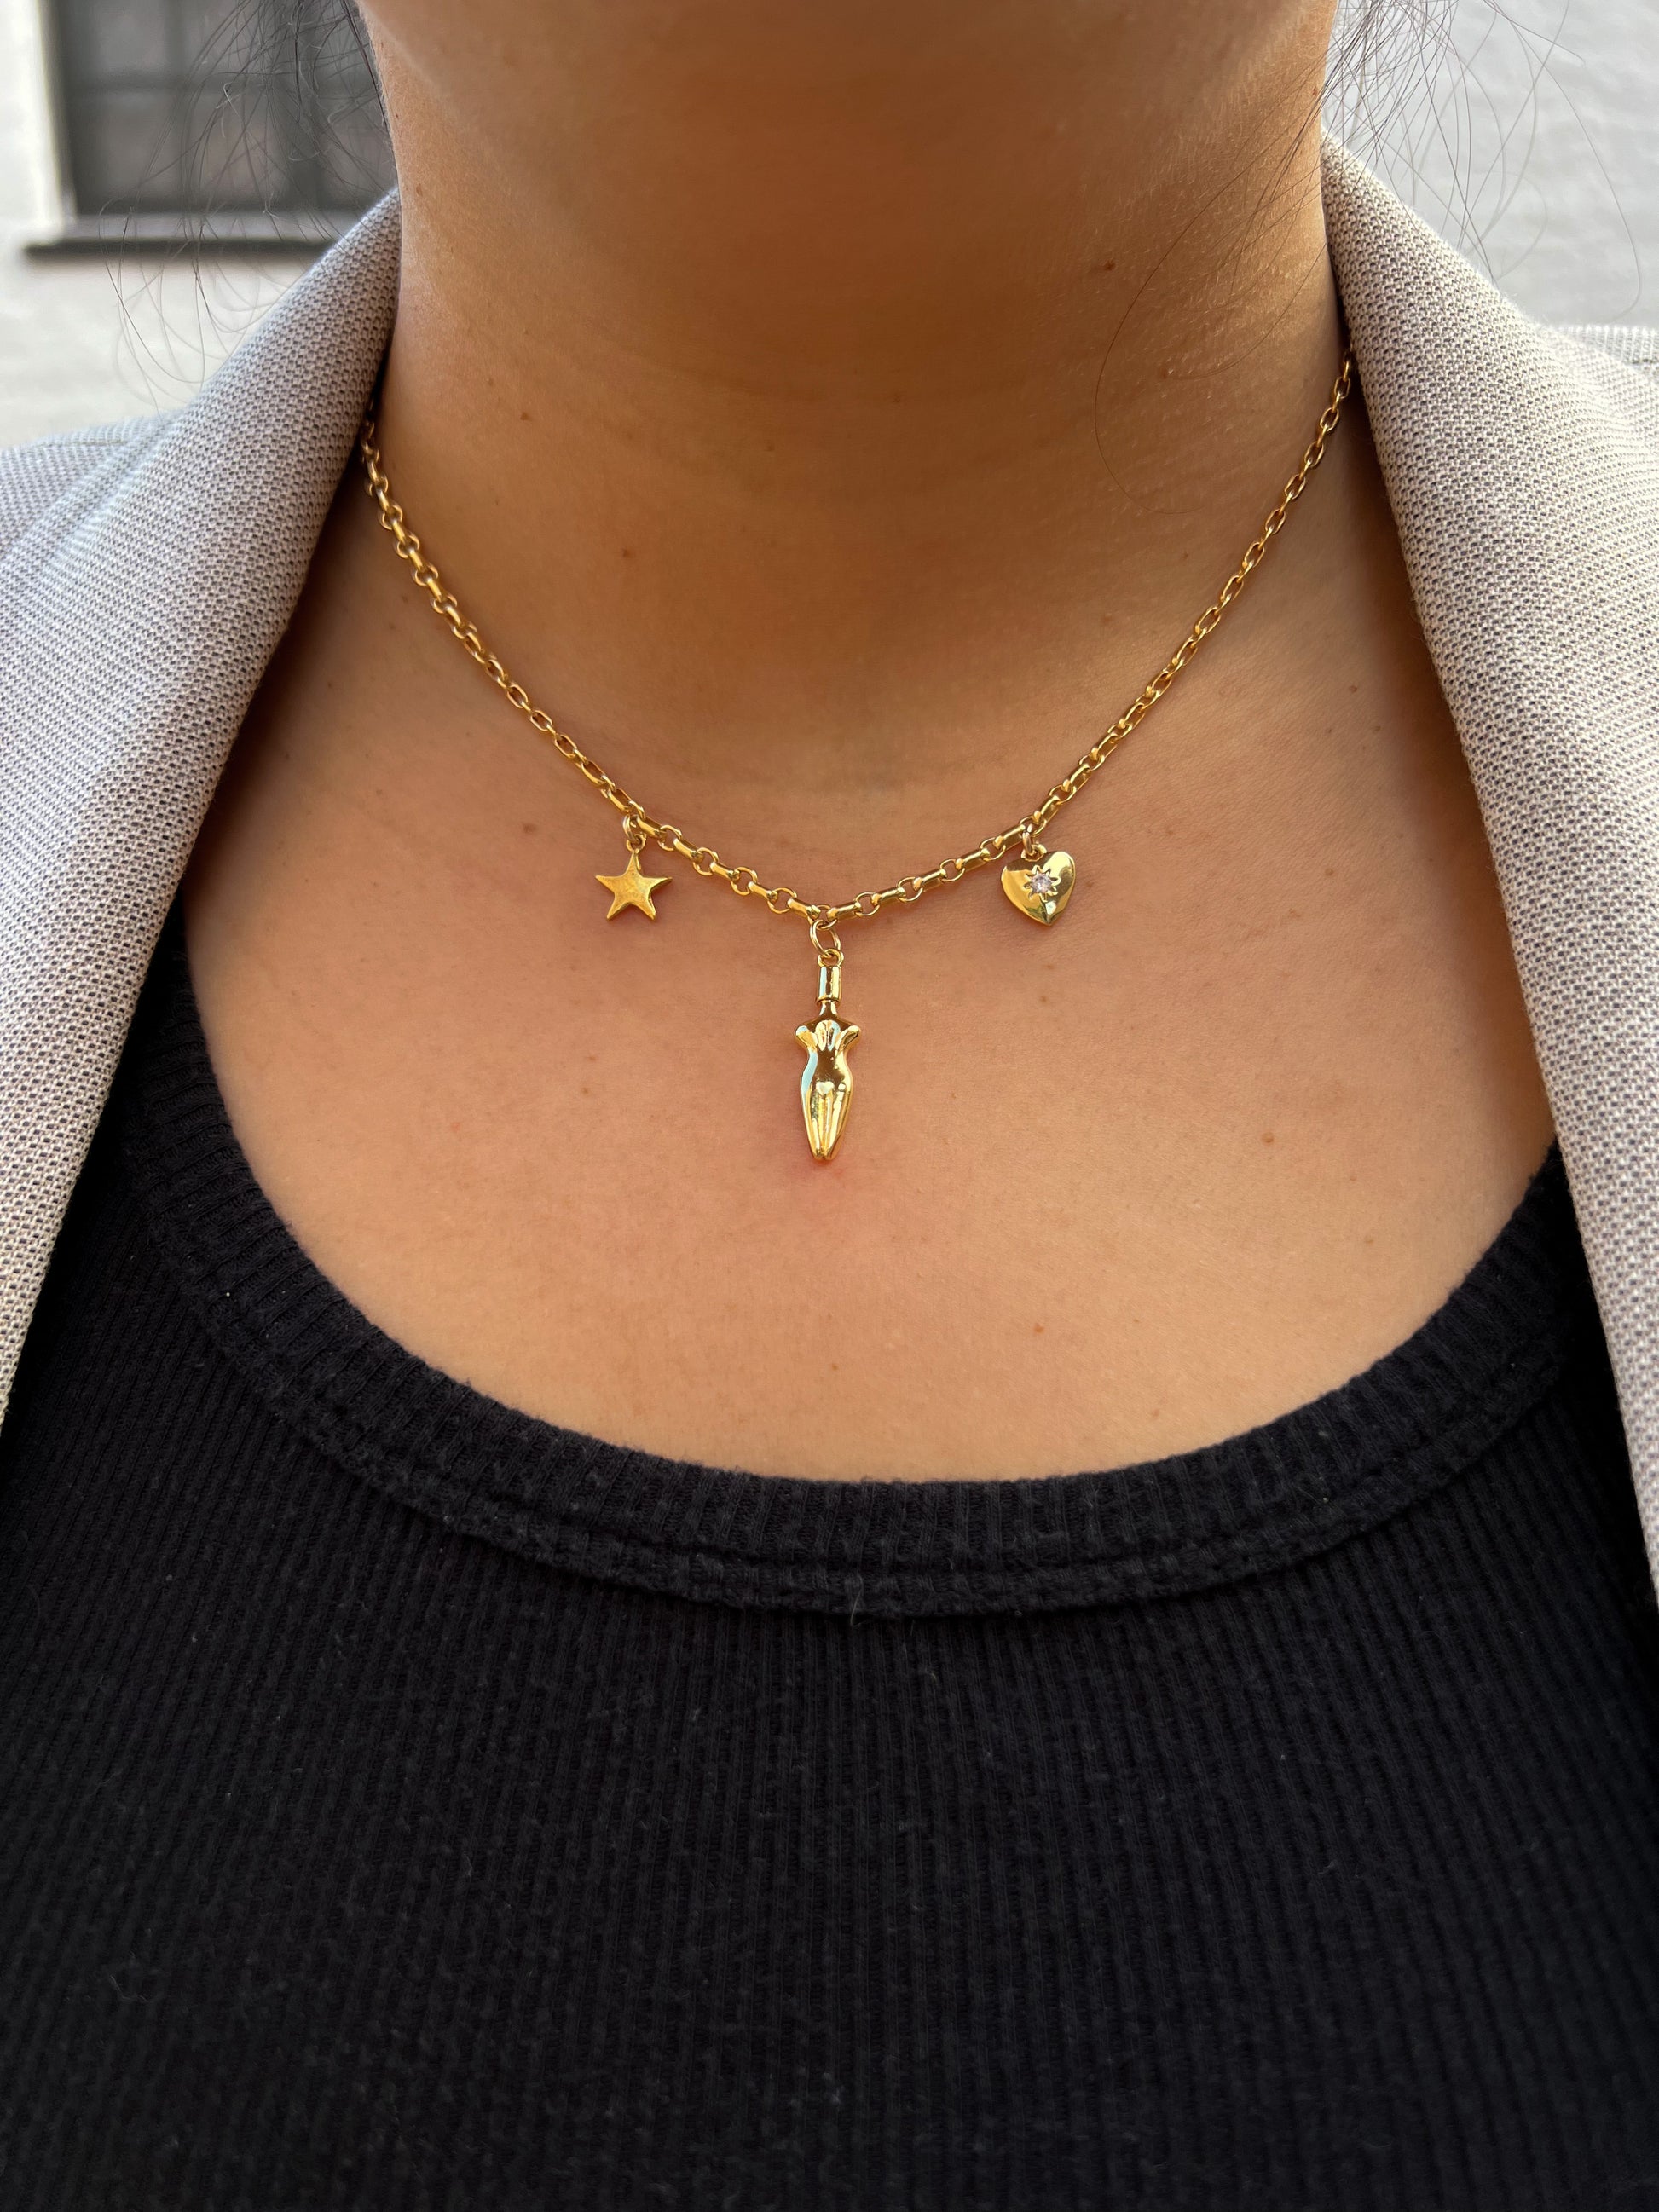 A close-up of model’s neck and chest area wearing a black tank top with a beige/gray blazer and the Lucia charm necklace. A 3 charm gold-filled necklace with a star (left side), body (center charm), and a cubic zirconia heart charm (right side). Heart charm has a cubic zirconia stone setting in the center of charm.